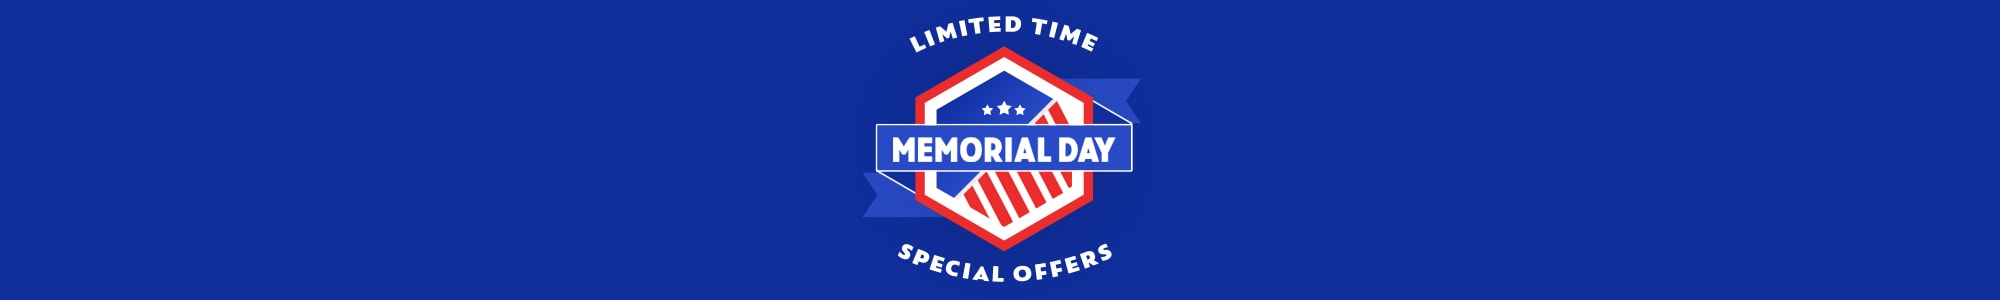 BMW Memorial Day Offers